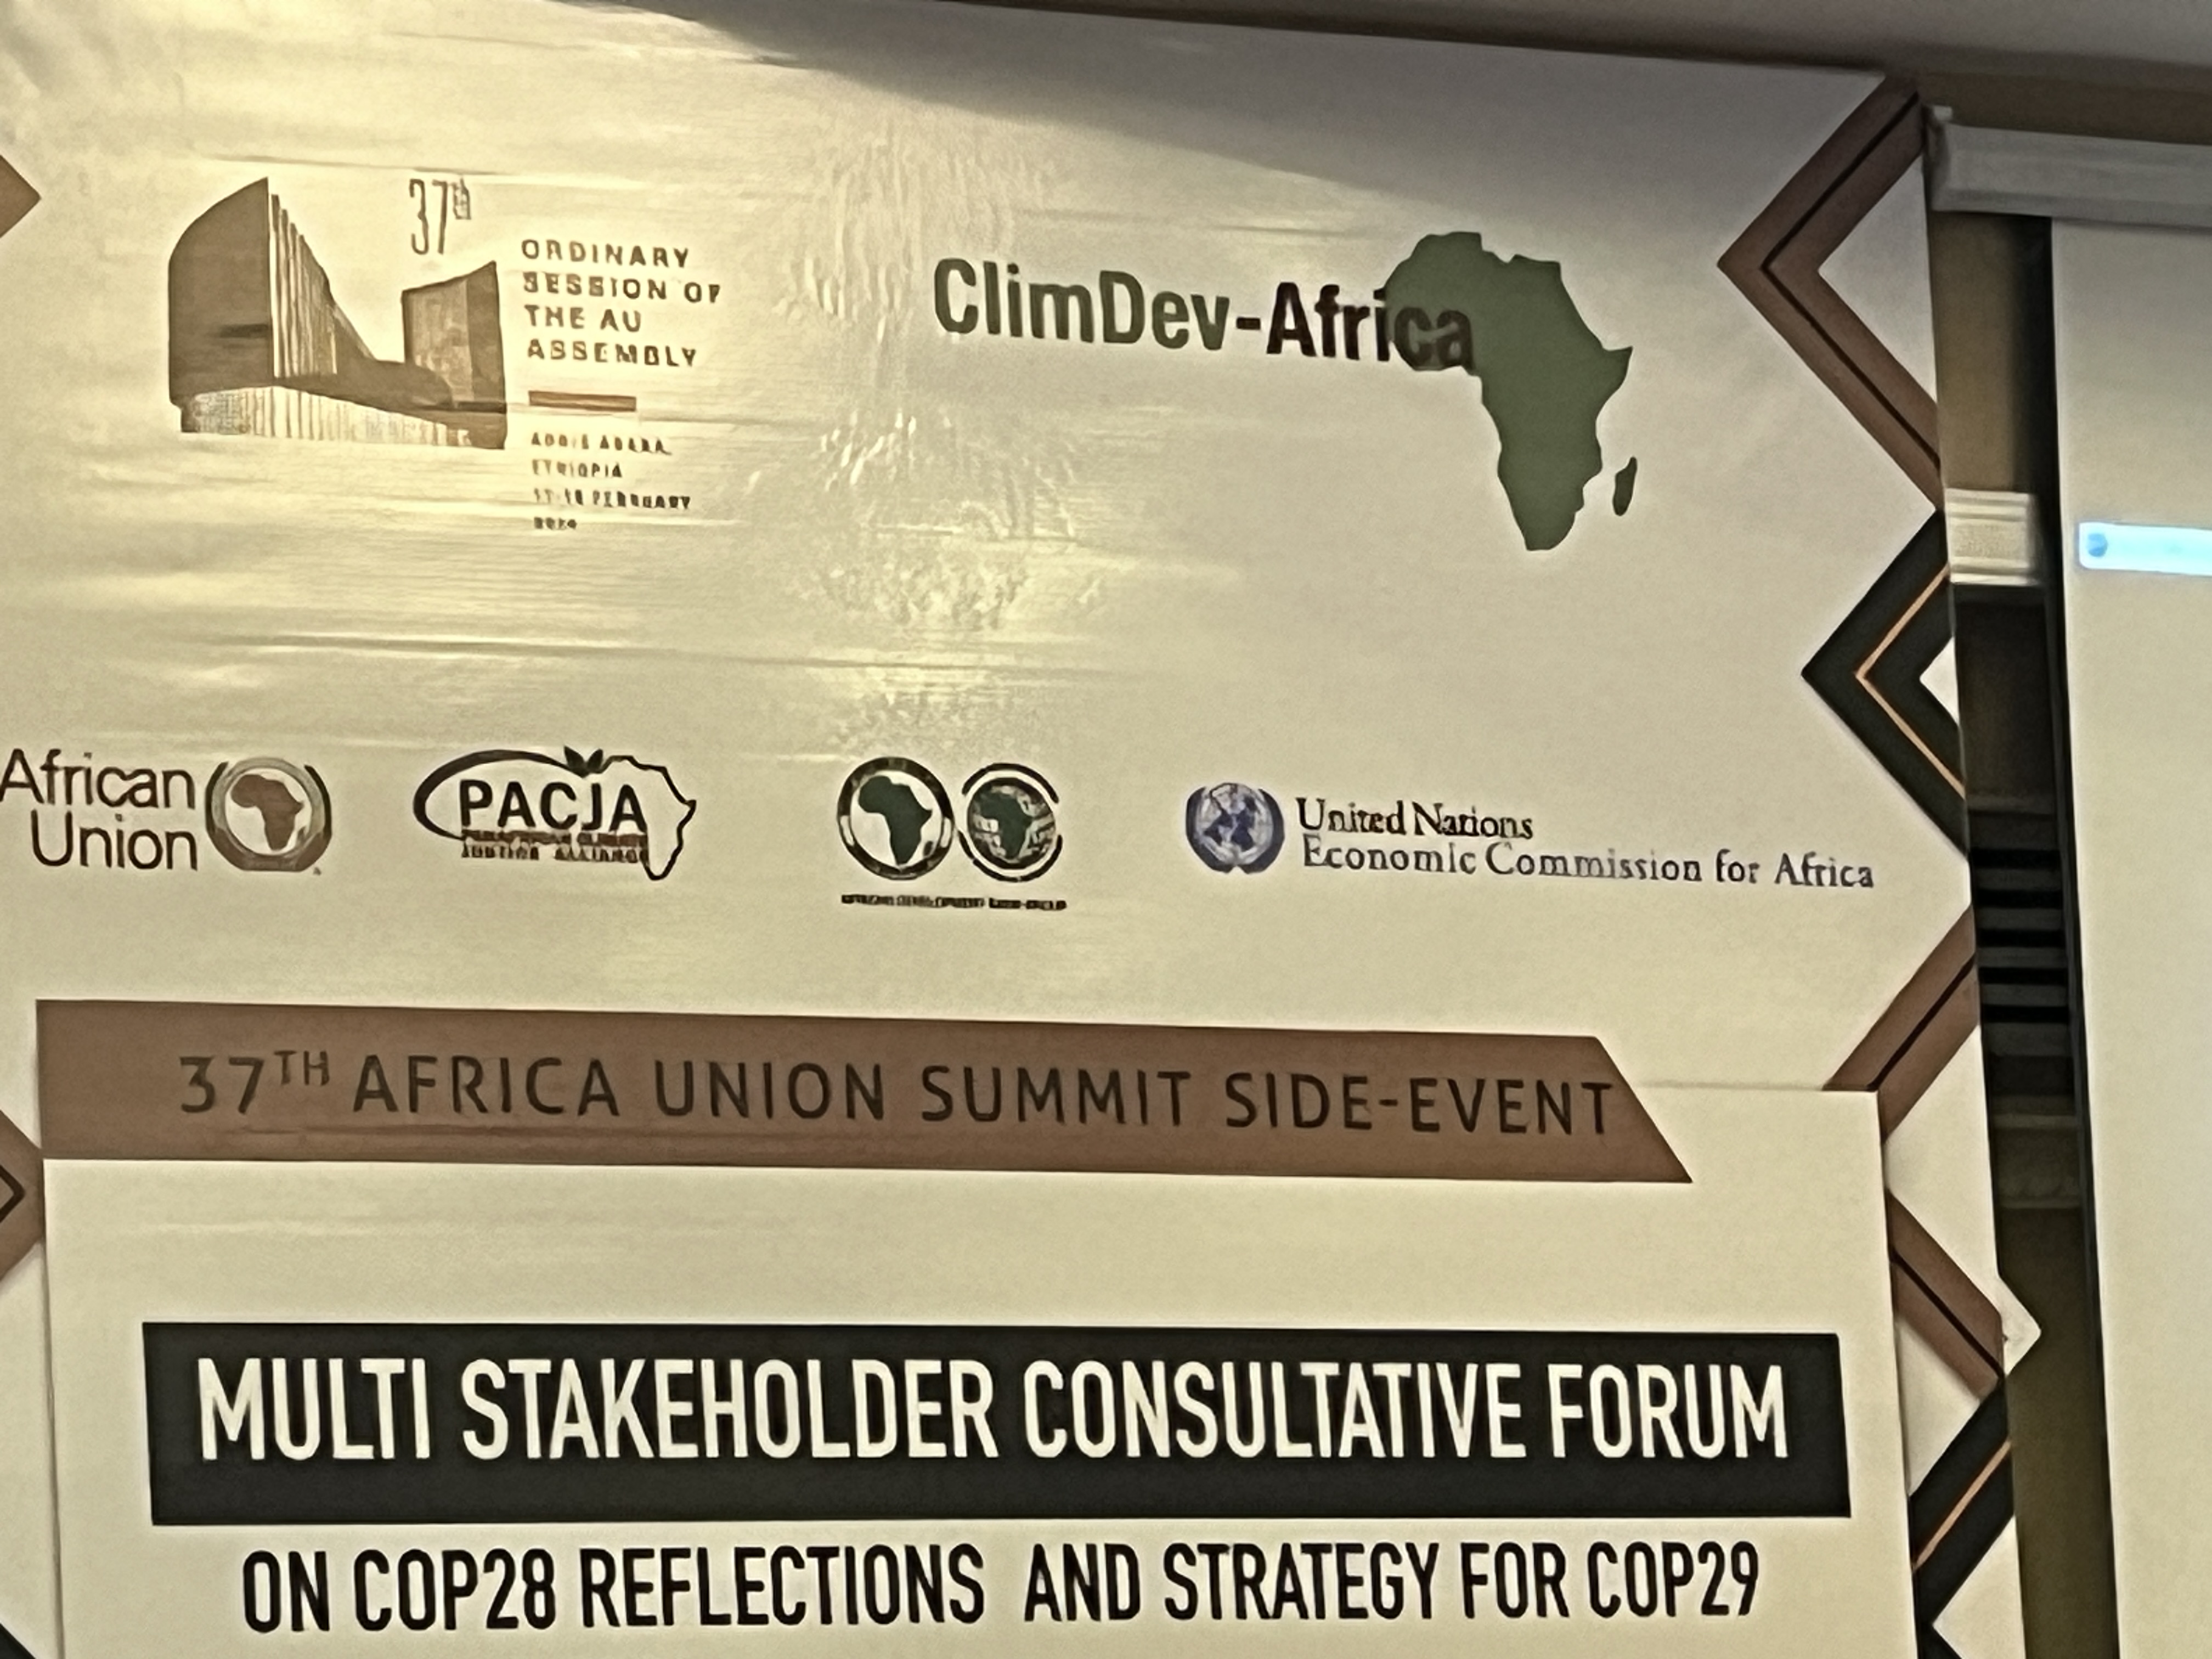 COP28 reflections ClimDev-Africa event